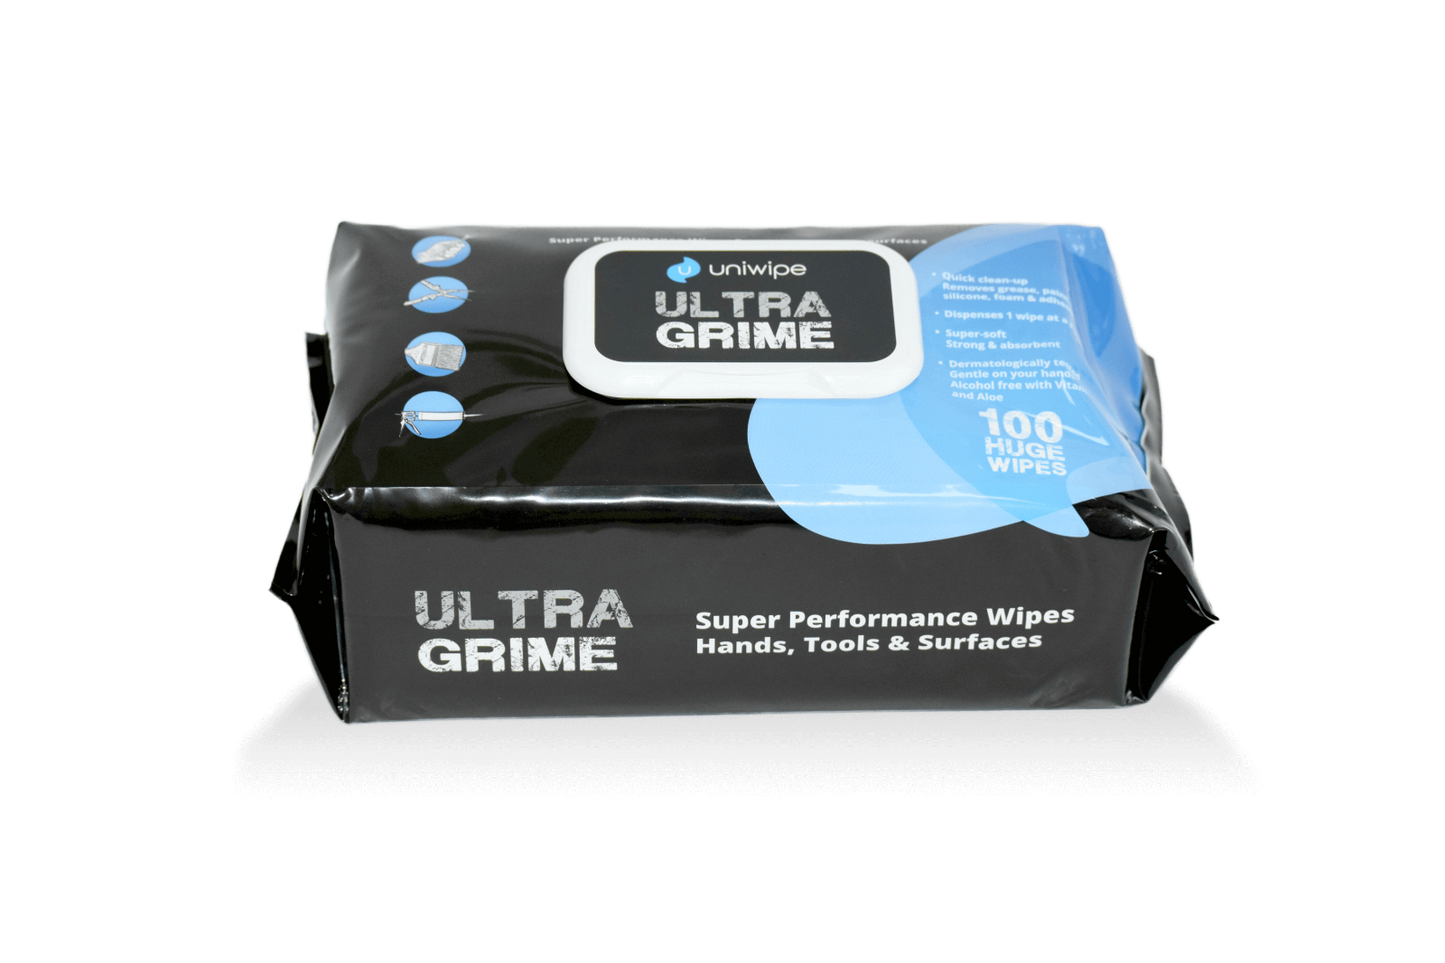 Uniwipe Ultra Grime Cleaning Wipes